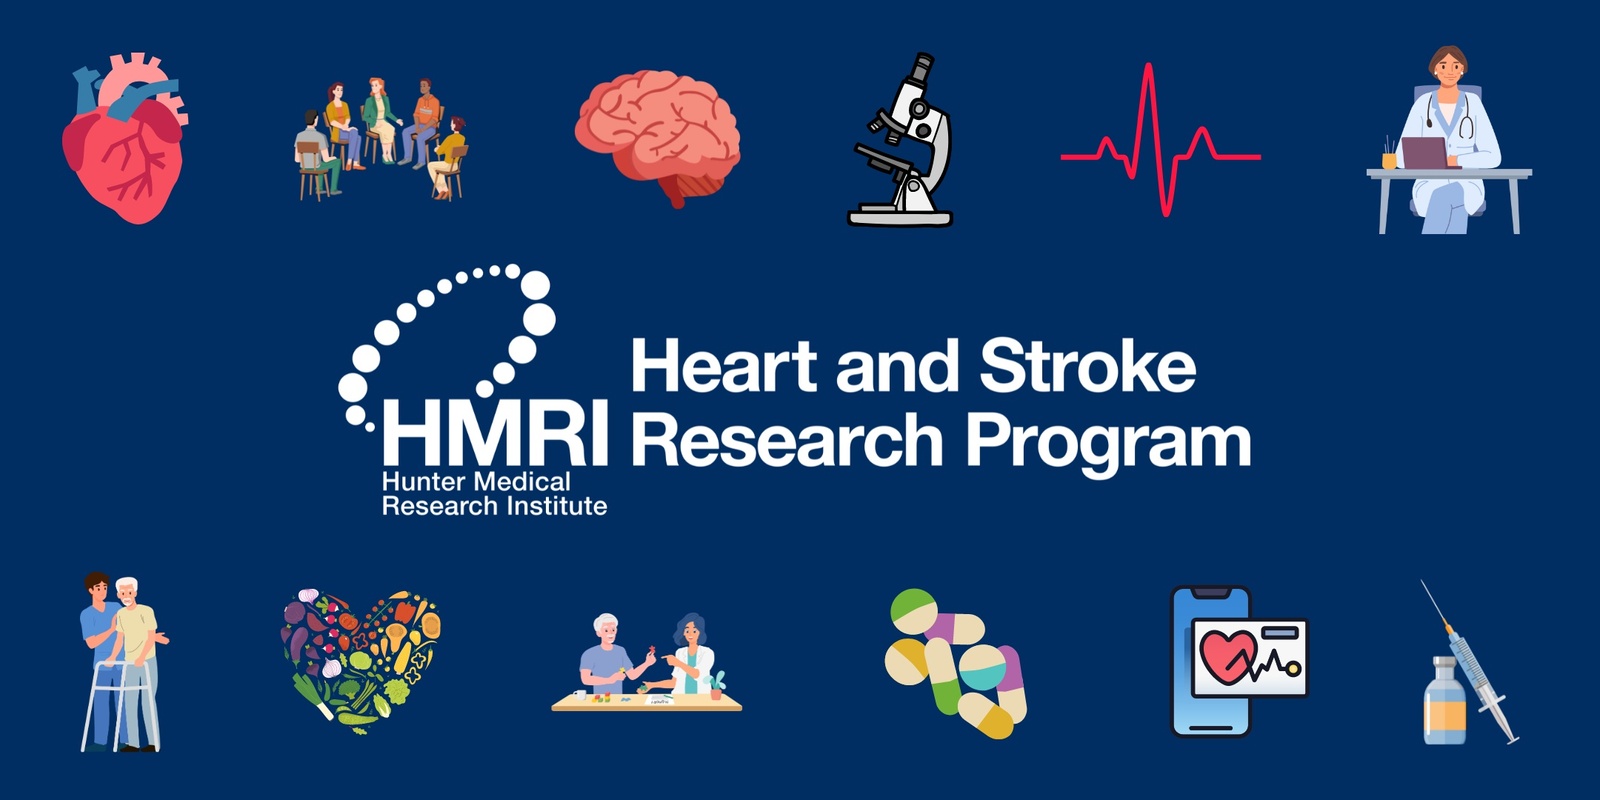 Banner image for HMRI Heart and Stroke Research Program Showcase